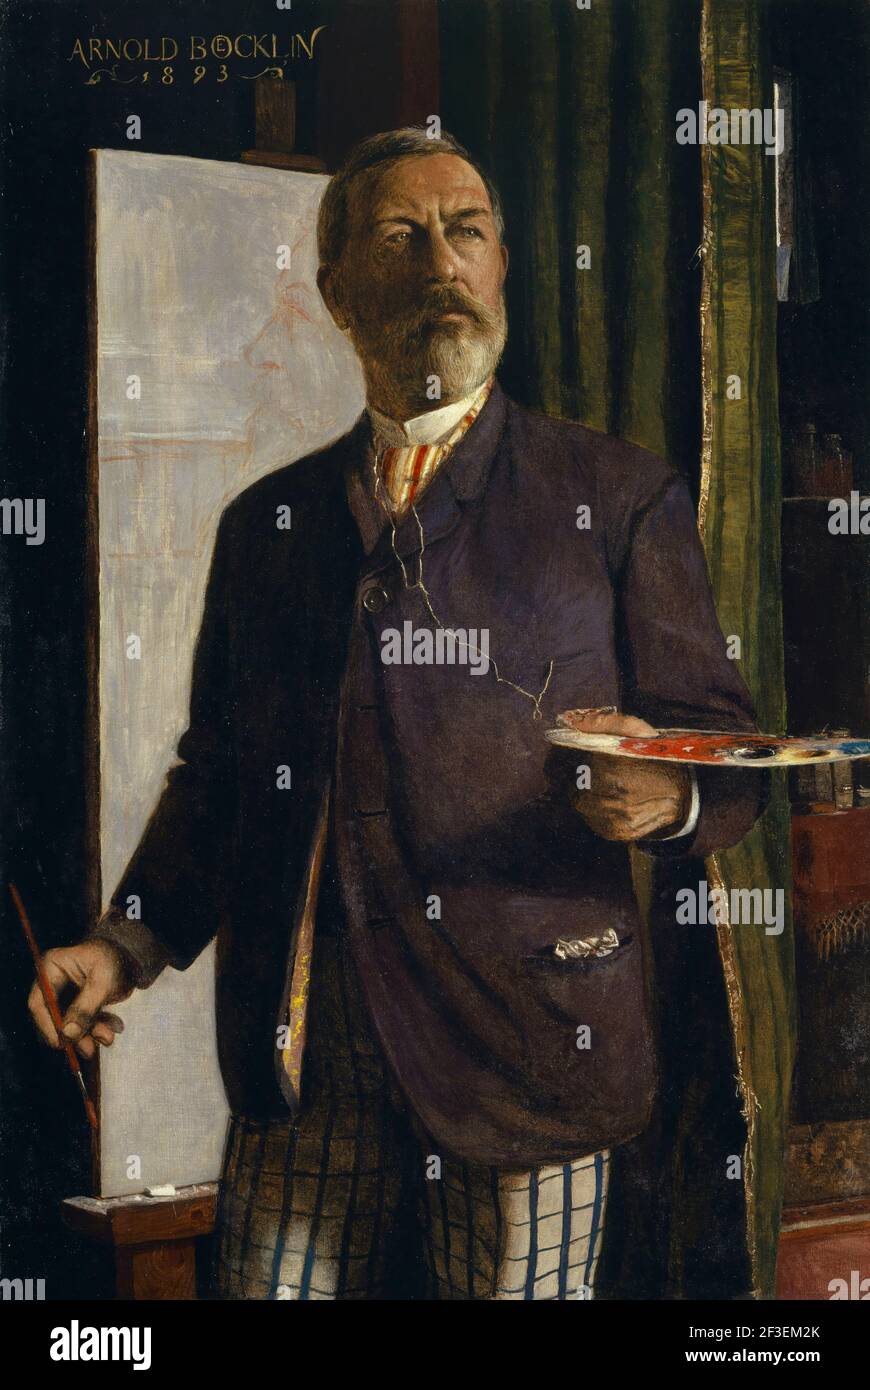 Self-Portrait in the Studio, 1893. Found in the collection of Art Museum Basel. Stock Photo